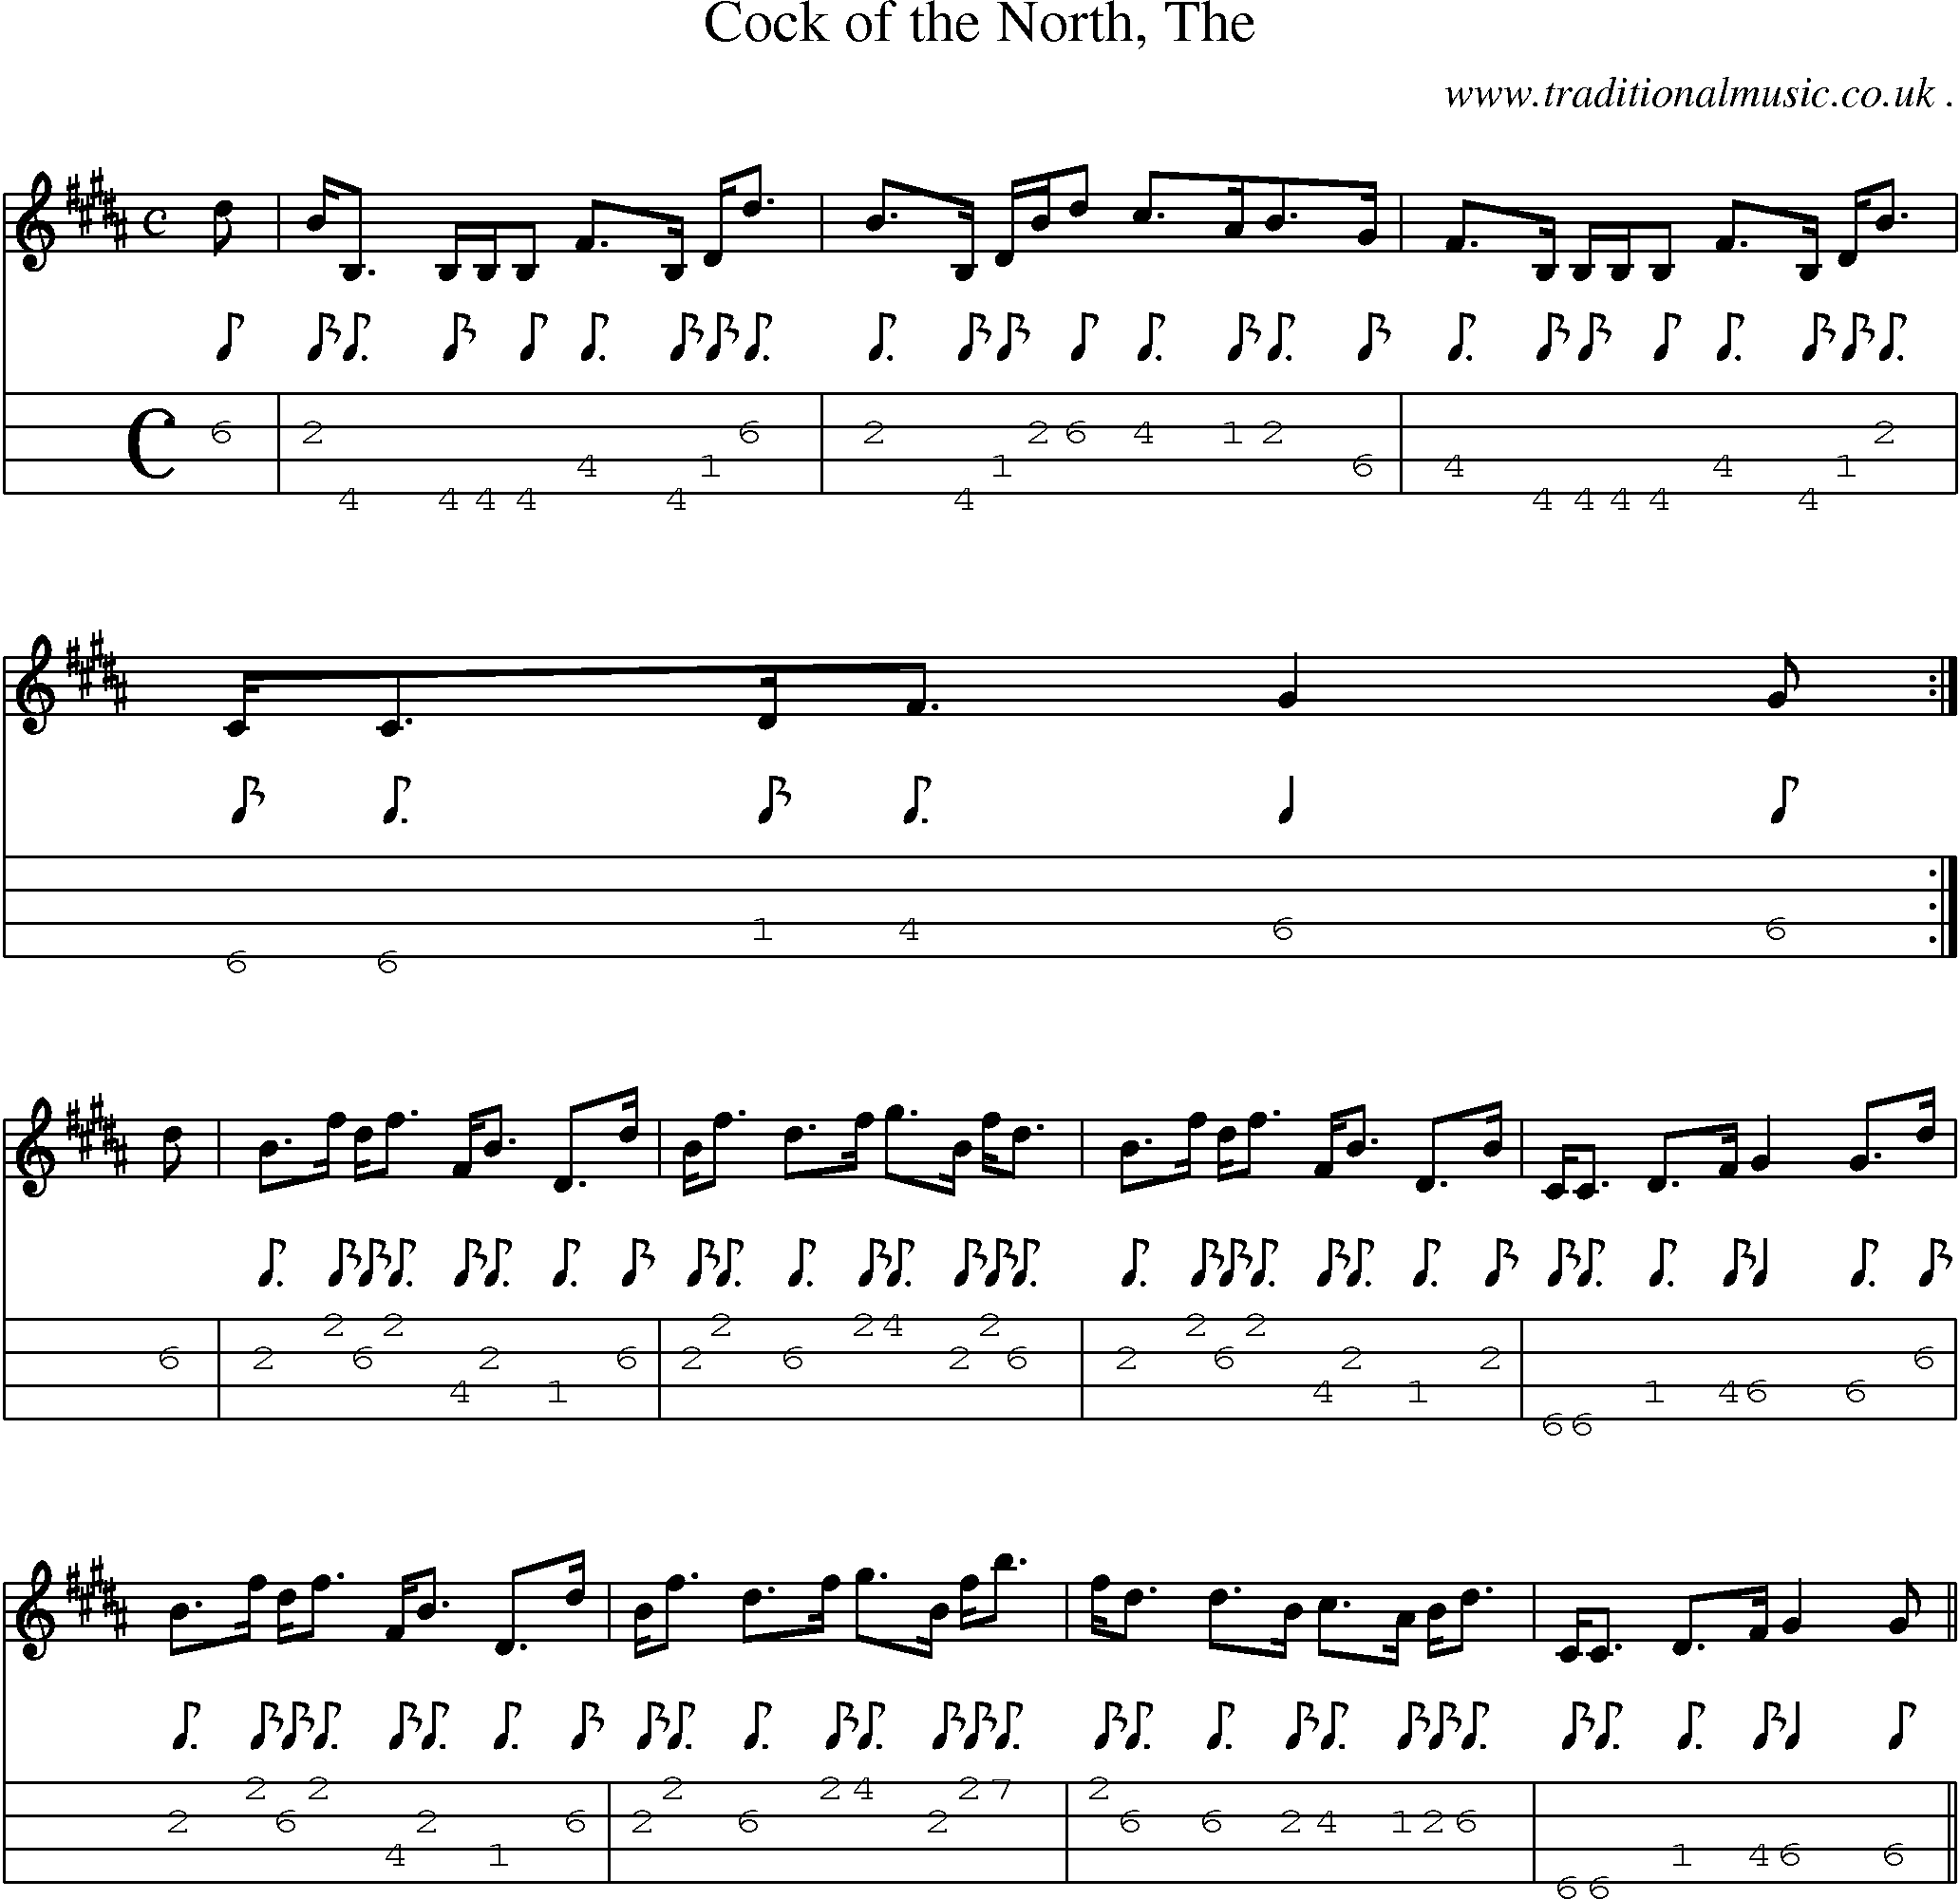 Sheet-music  score, Chords and Mandolin Tabs for Cock Of The North The